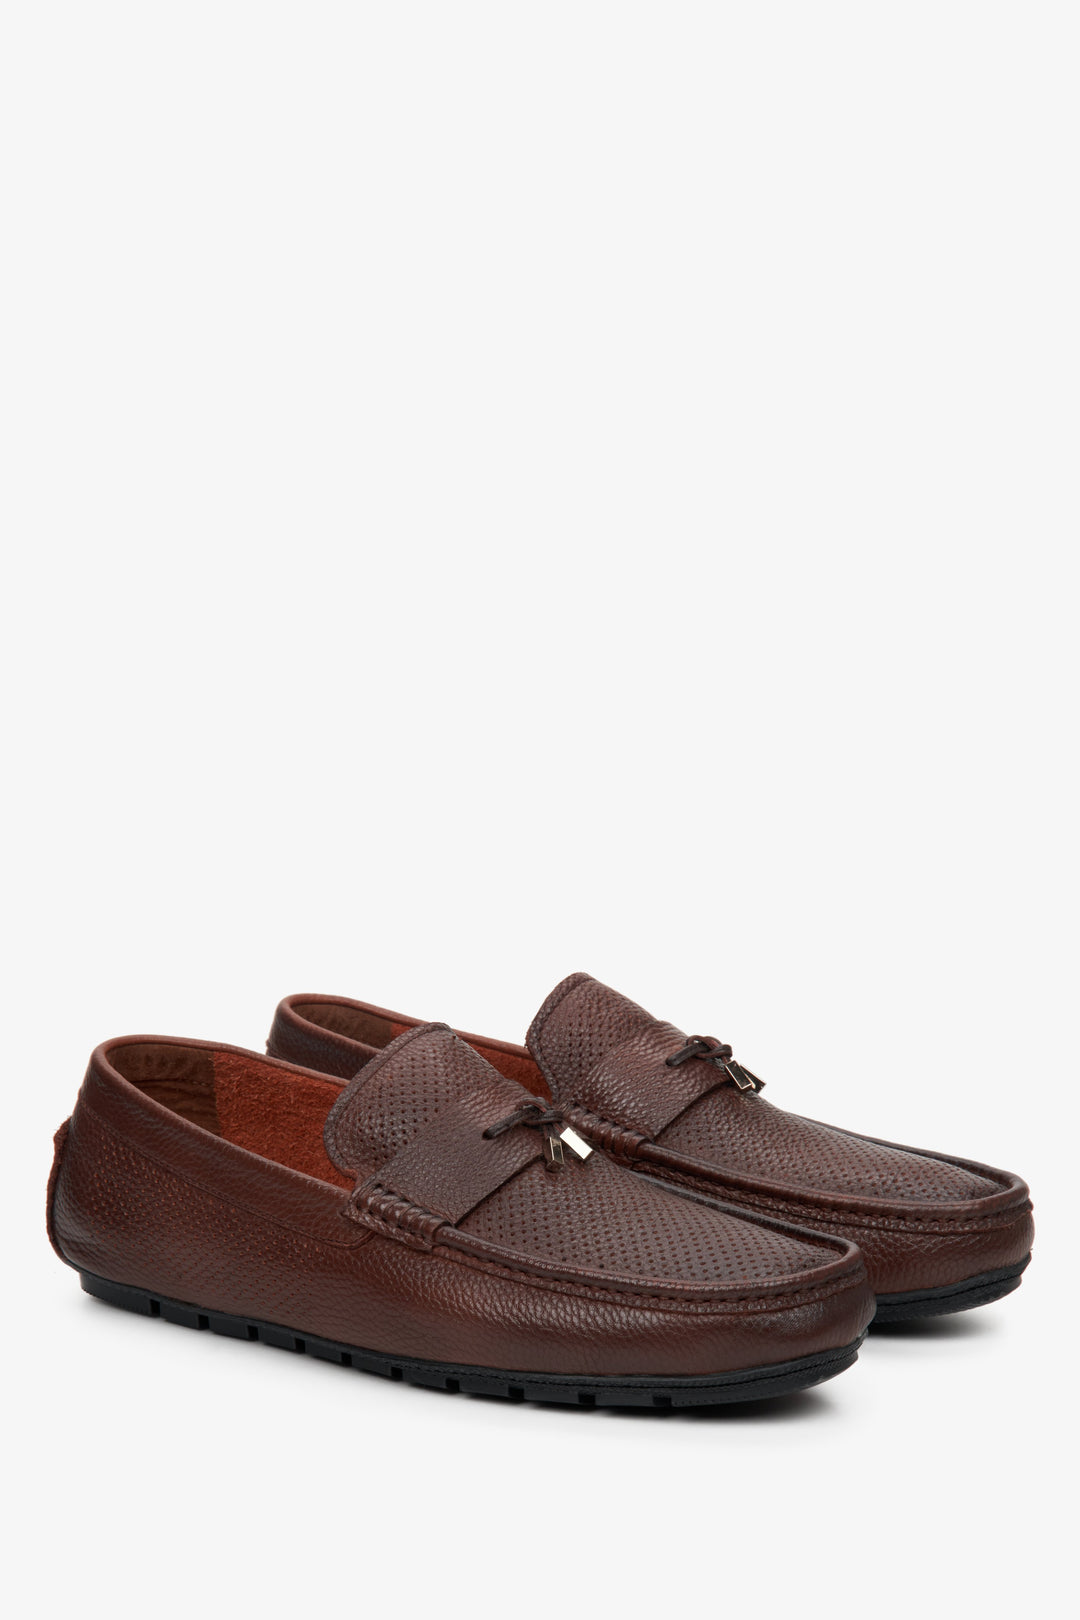 Estro men's brown loafers made of genuine leather - presentation of the toe and side seam of the shoe.